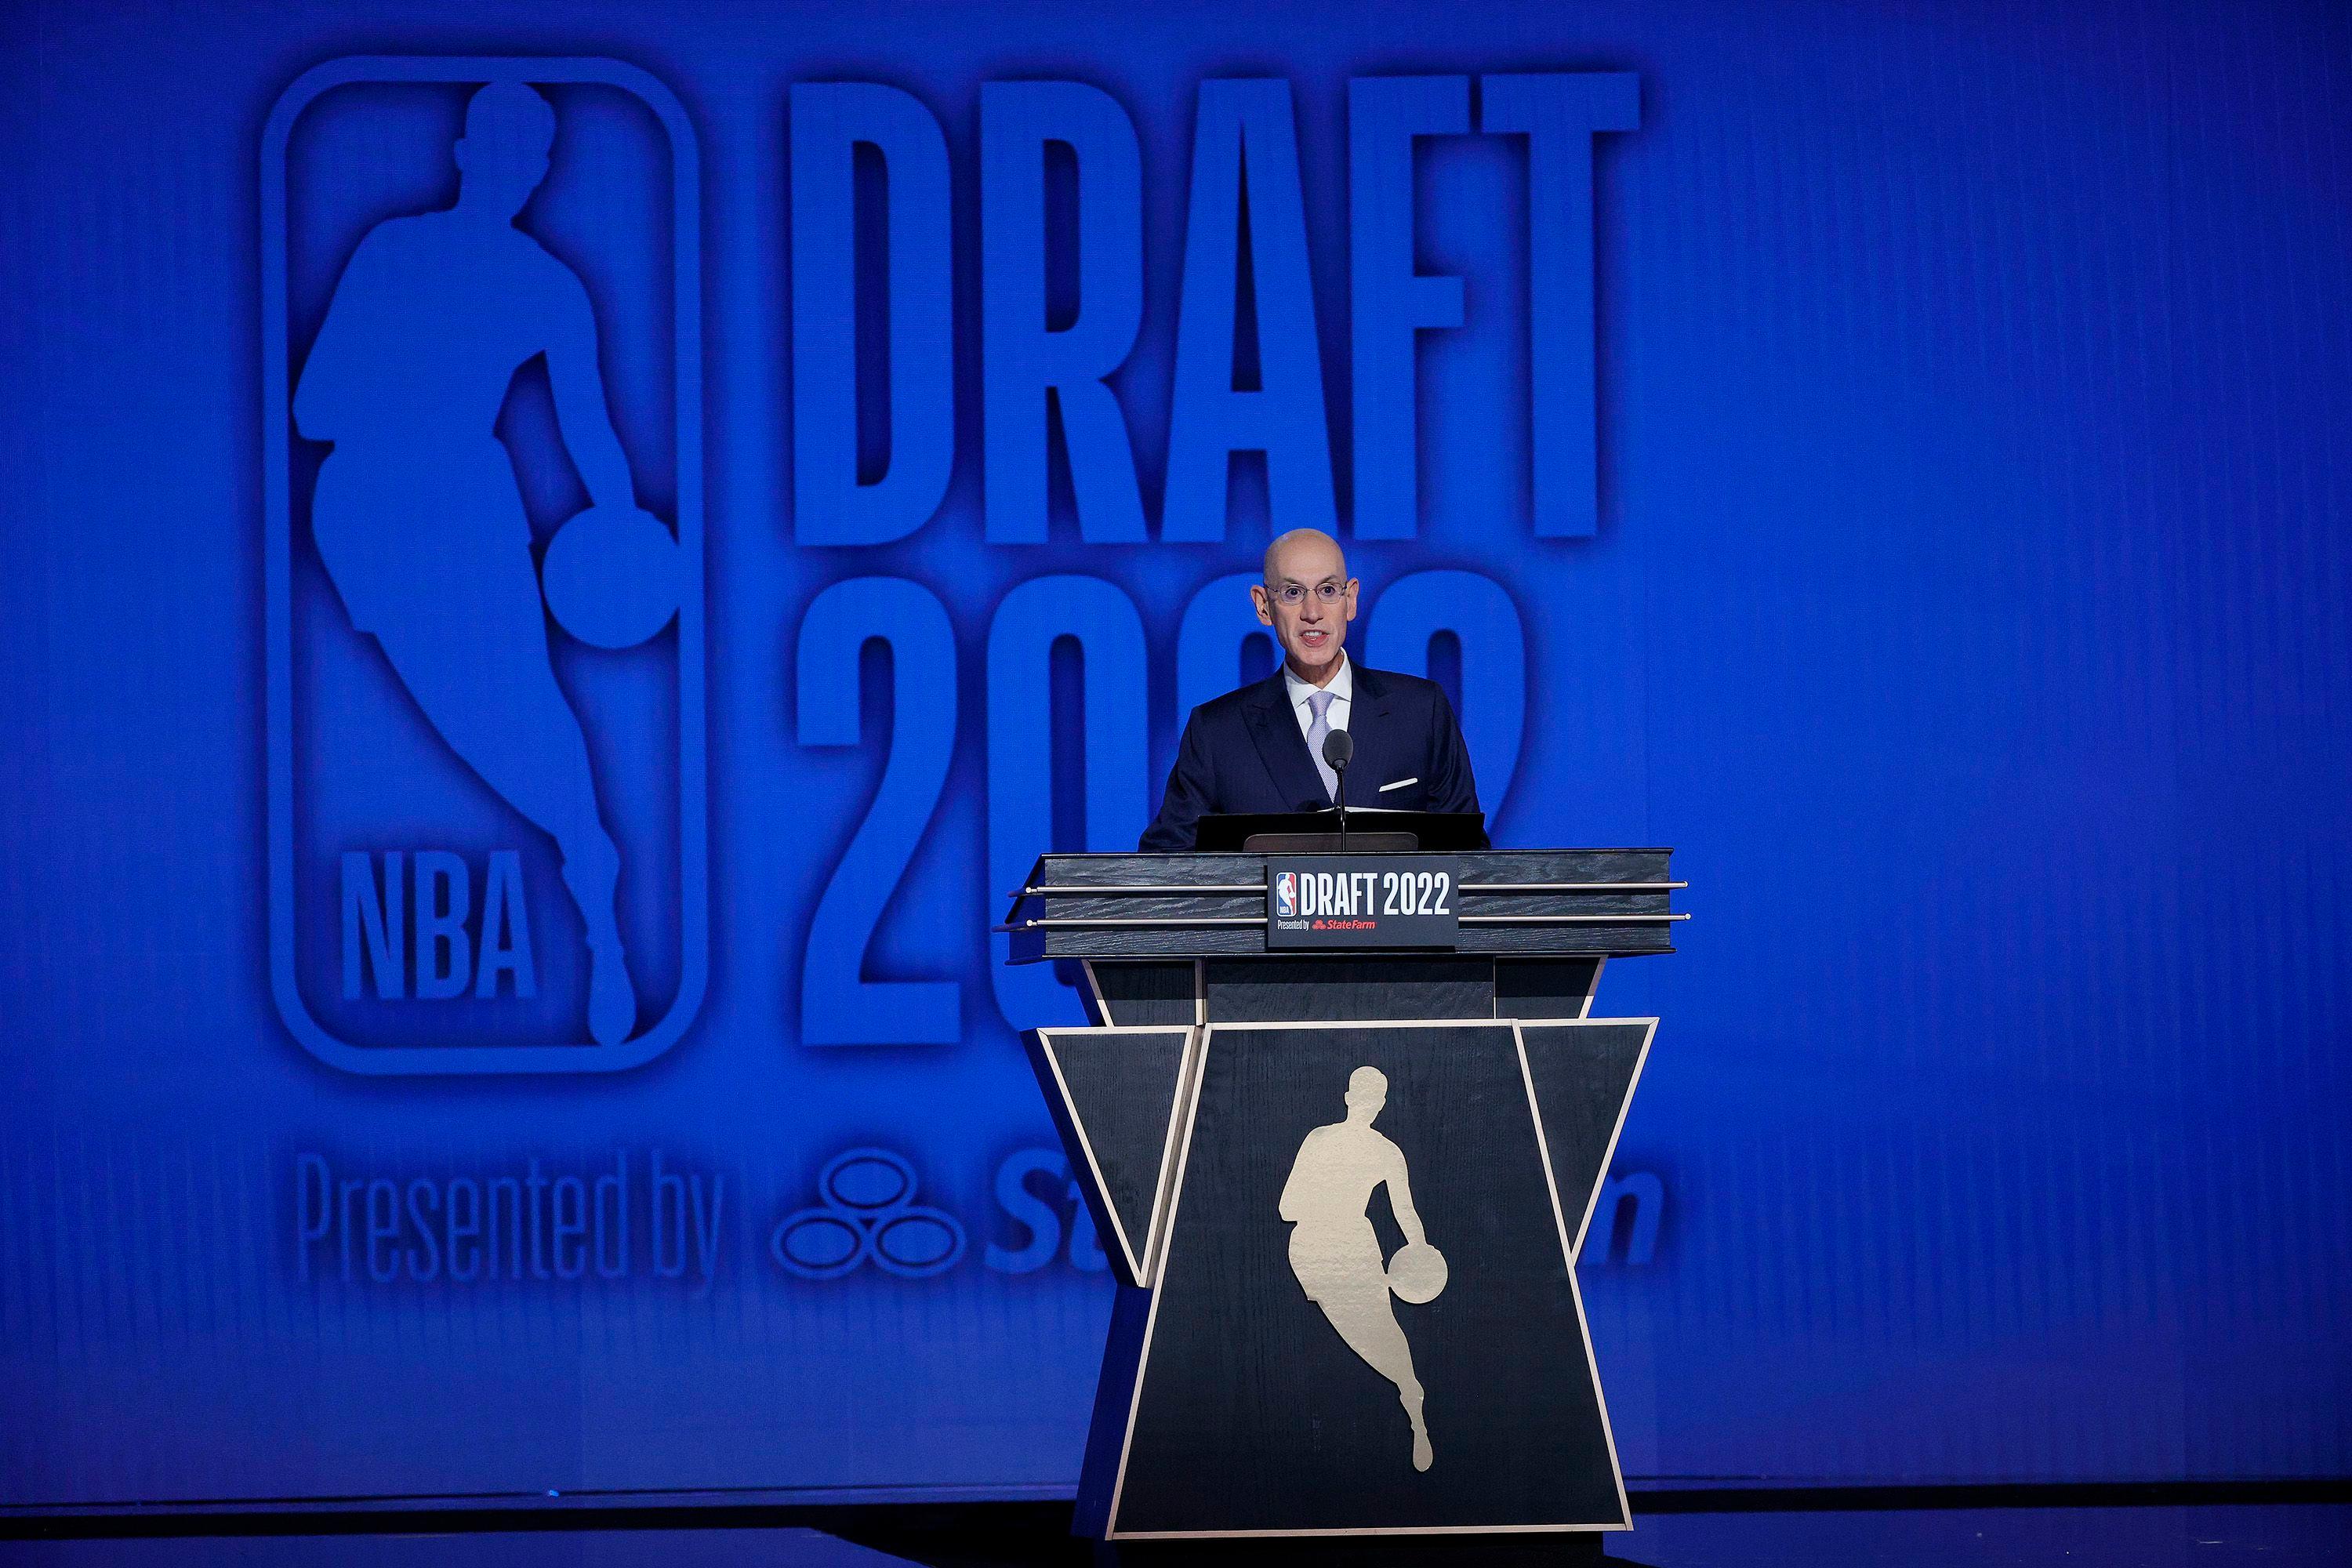 Chicago Bulls won’t have a 1st-round pick this year after getting No. 11 — which they must convey to the Orlando Magic — in the NBA draft lottery